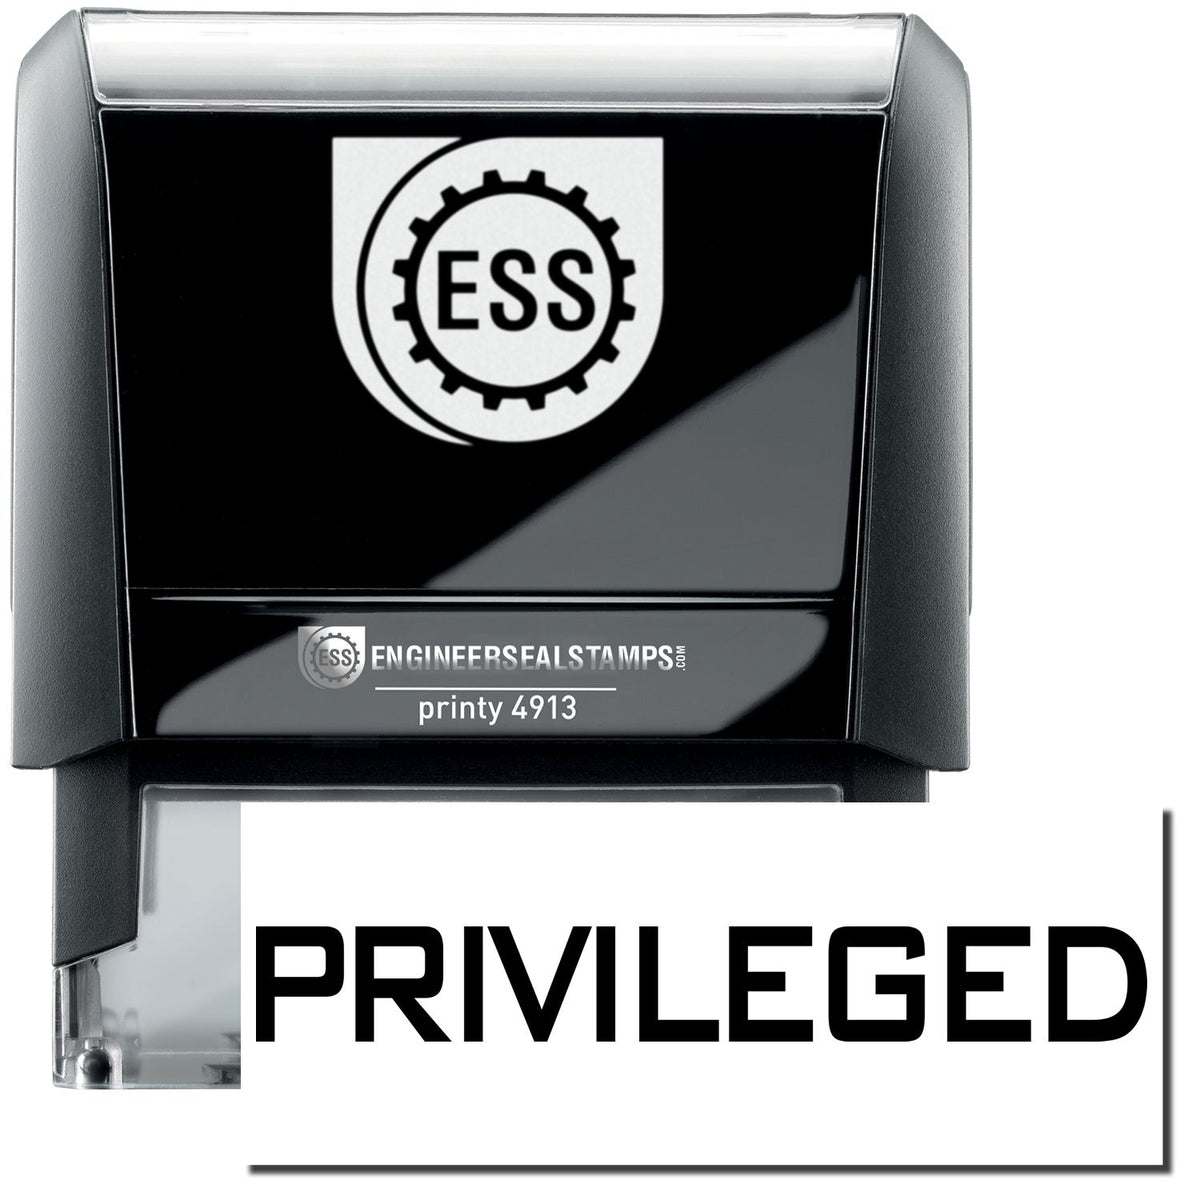 A self-inking stamp with a stamped image showing how the text &quot;PRIVILEGED&quot; in a large font is displayed by it after stamping.